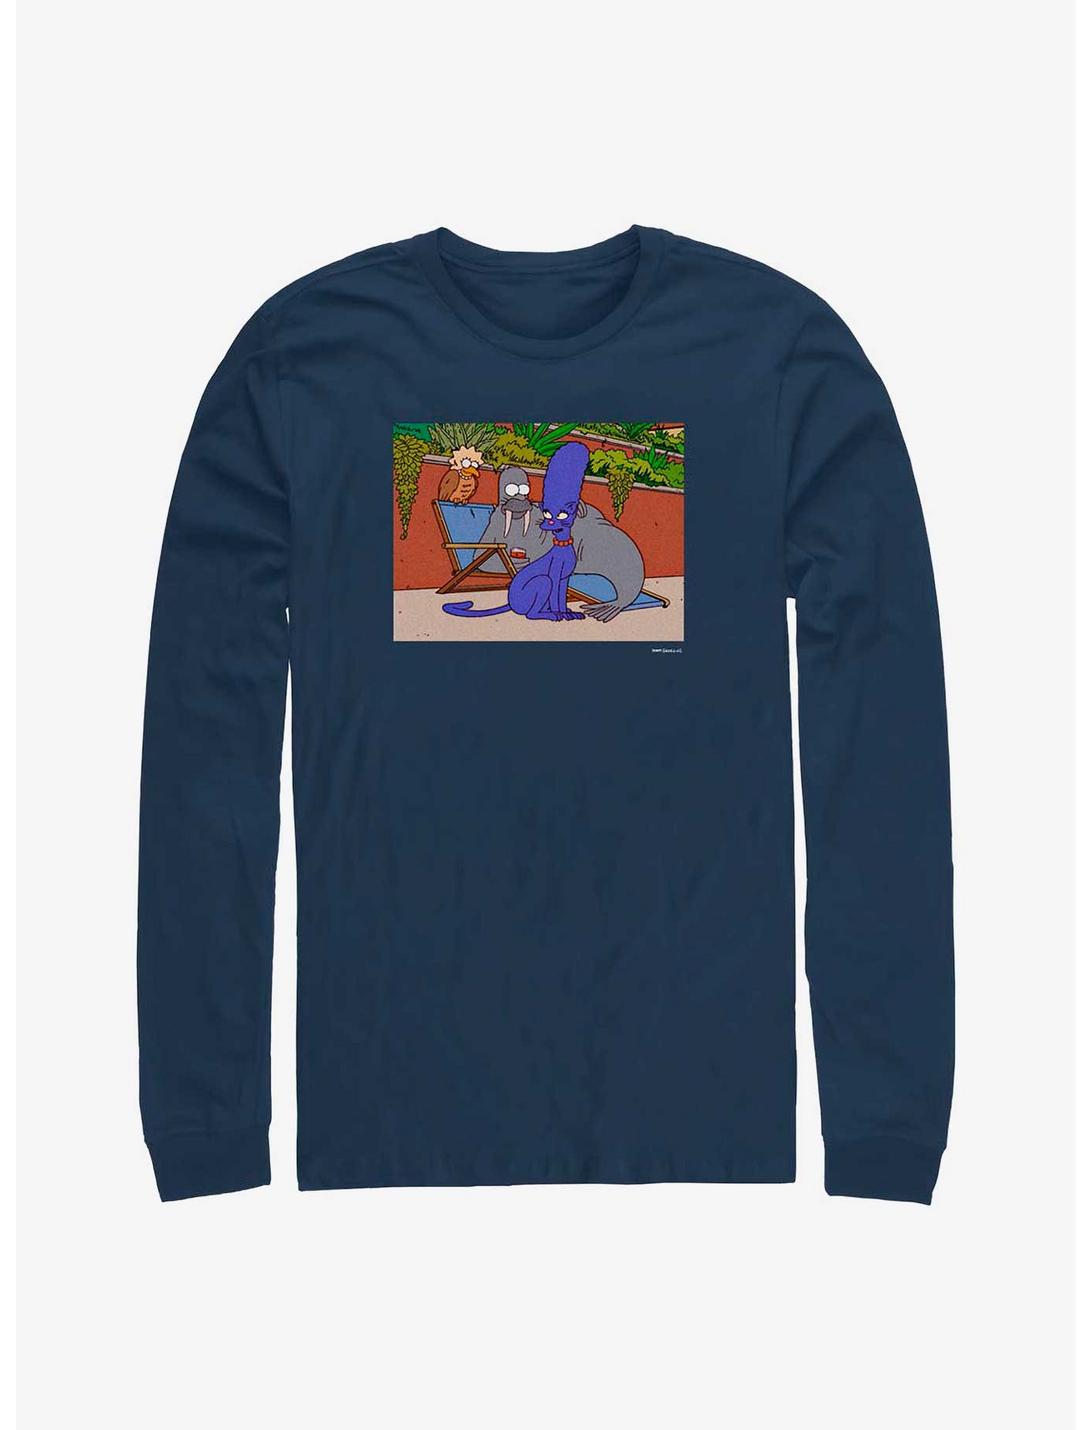 The Simpsons Treehouse Of Horror XIII Long-Sleeve T-Shirt, NAVY, hi-res